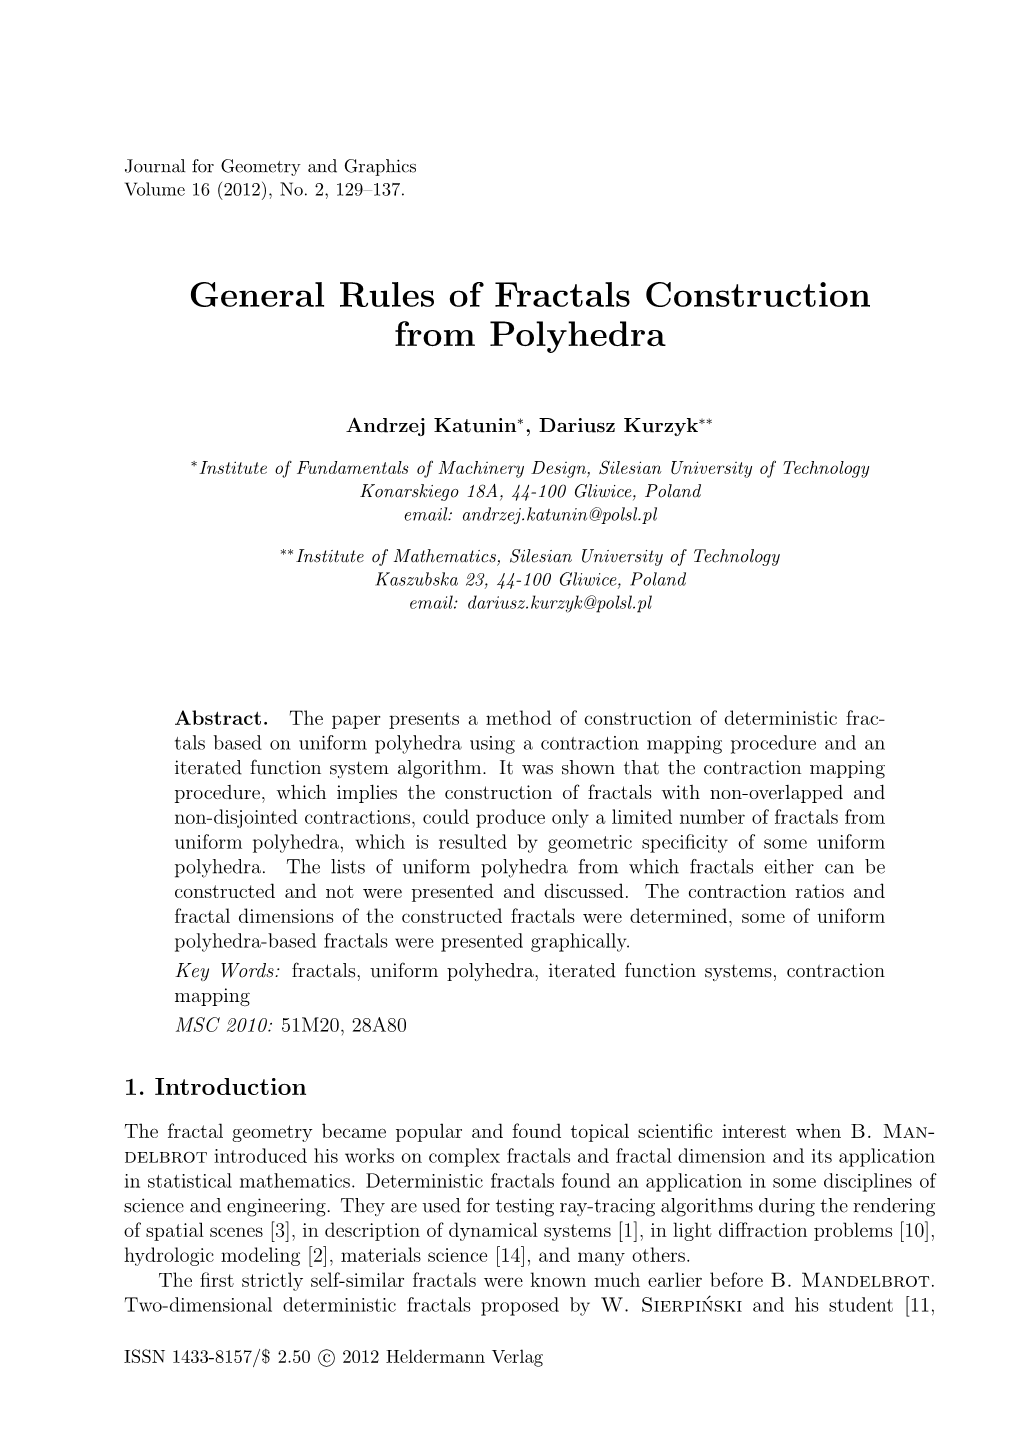 General Rules of Fractals Construction from Polyhedra